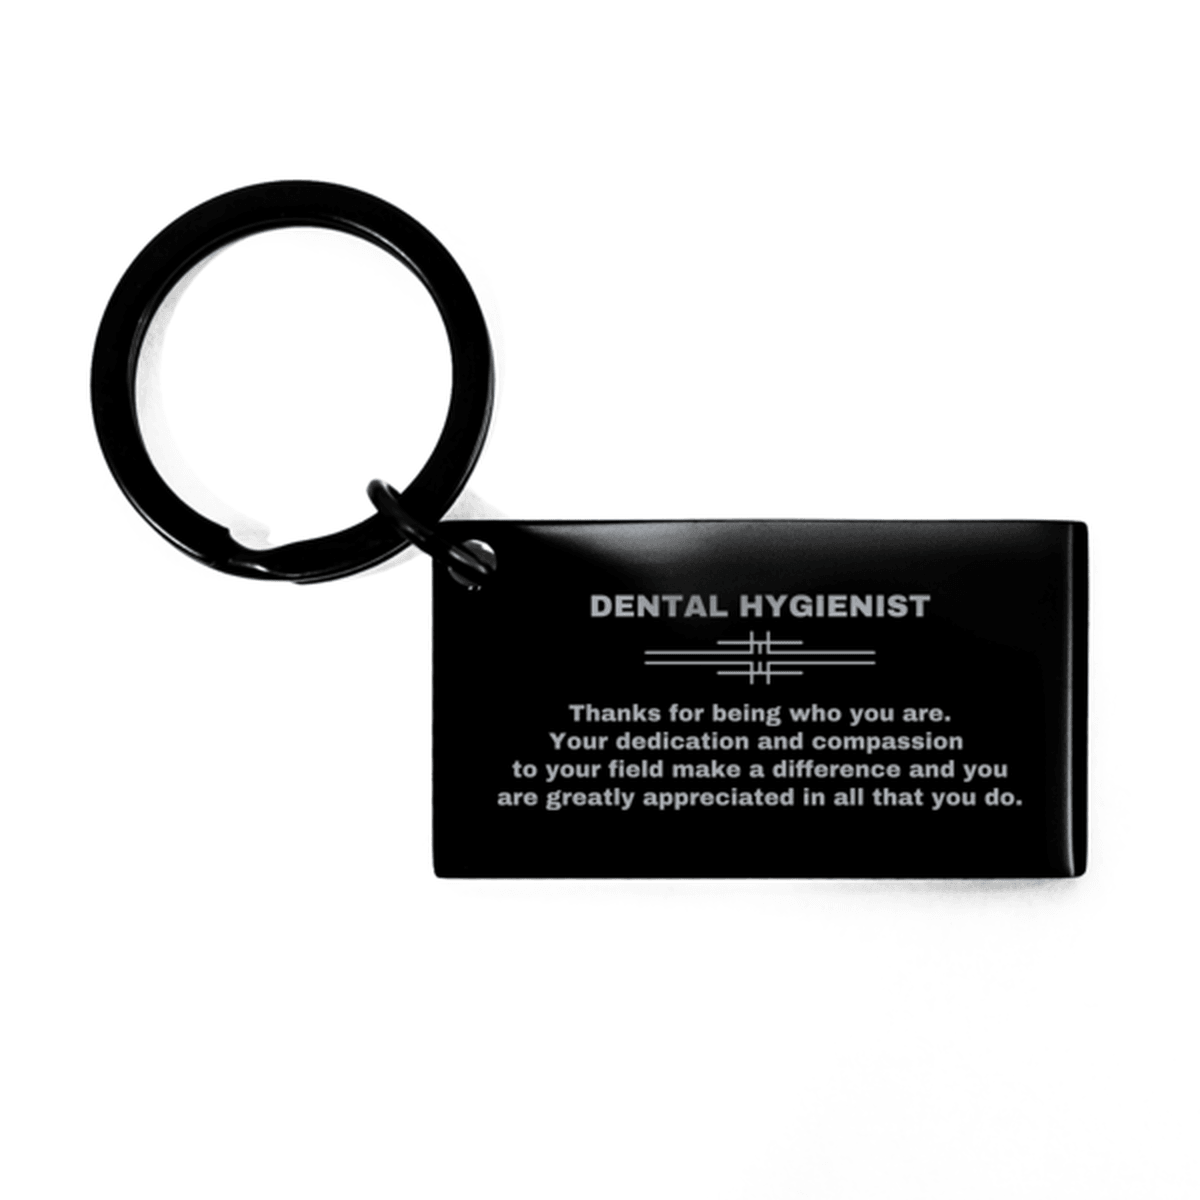 Dental Hygienist Black Engraved Keychain - Thanks for being who you are - Birthday Christmas Jewelry Gifts Coworkers Colleague Boss - Mallard Moon Gift Shop